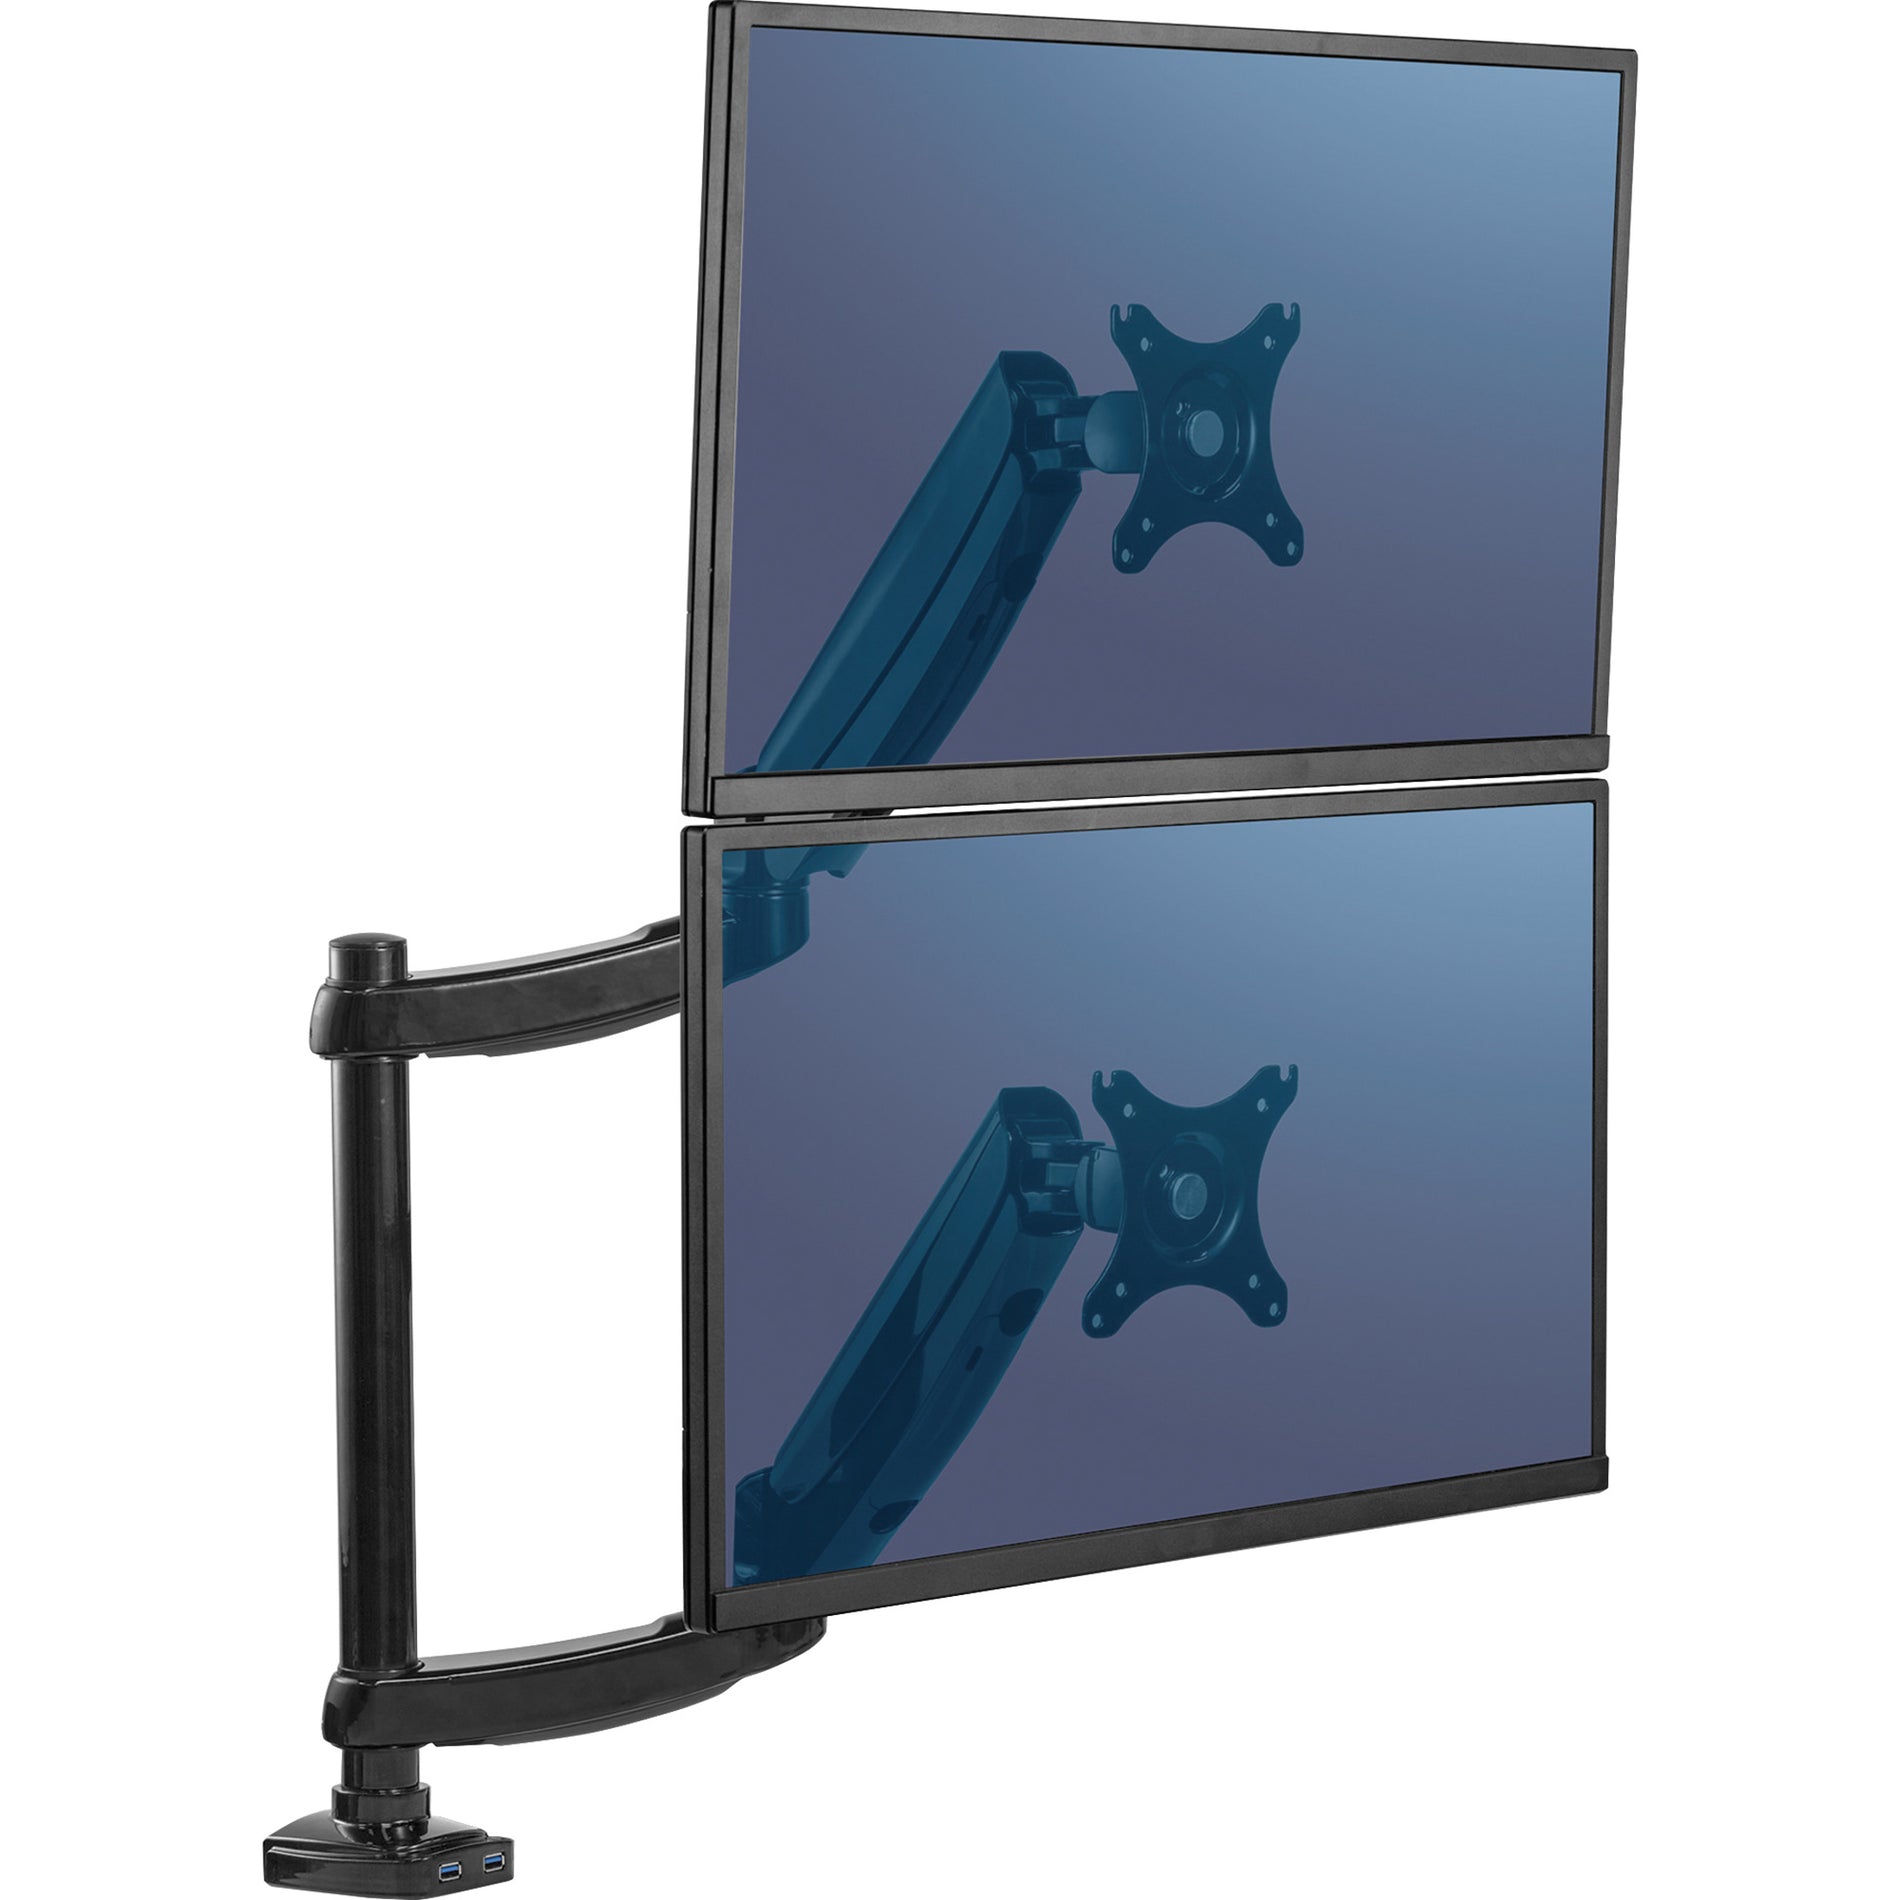 Fellowes 8043401 Platinum Series Dual Stacking Monitor Arm, Supports 2 Monitors up to 27", 44 lb Capacity